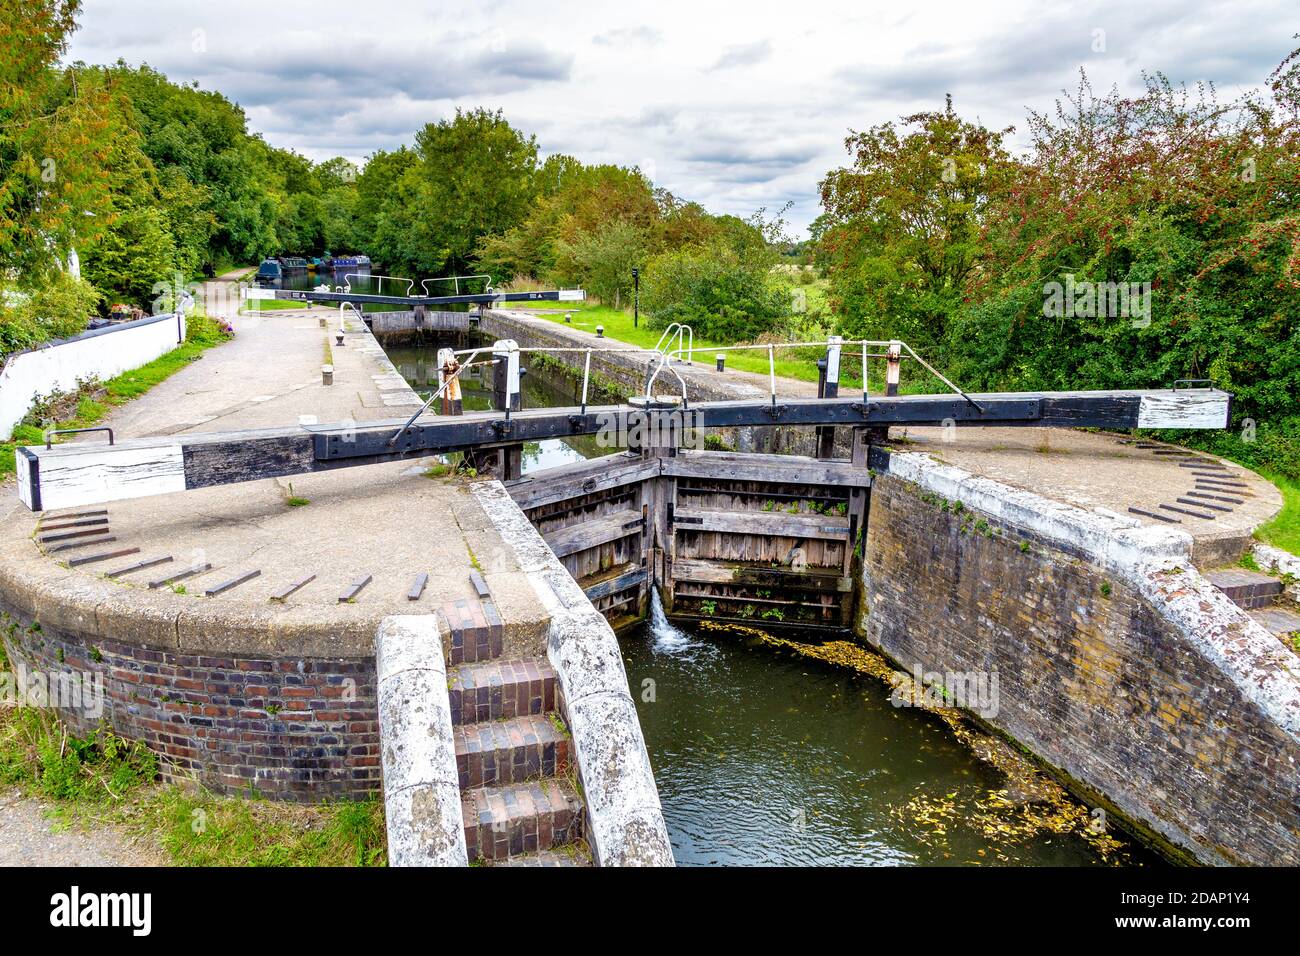 Stockers Lock, Colne Valley, Royaume-Uni Banque D'Images